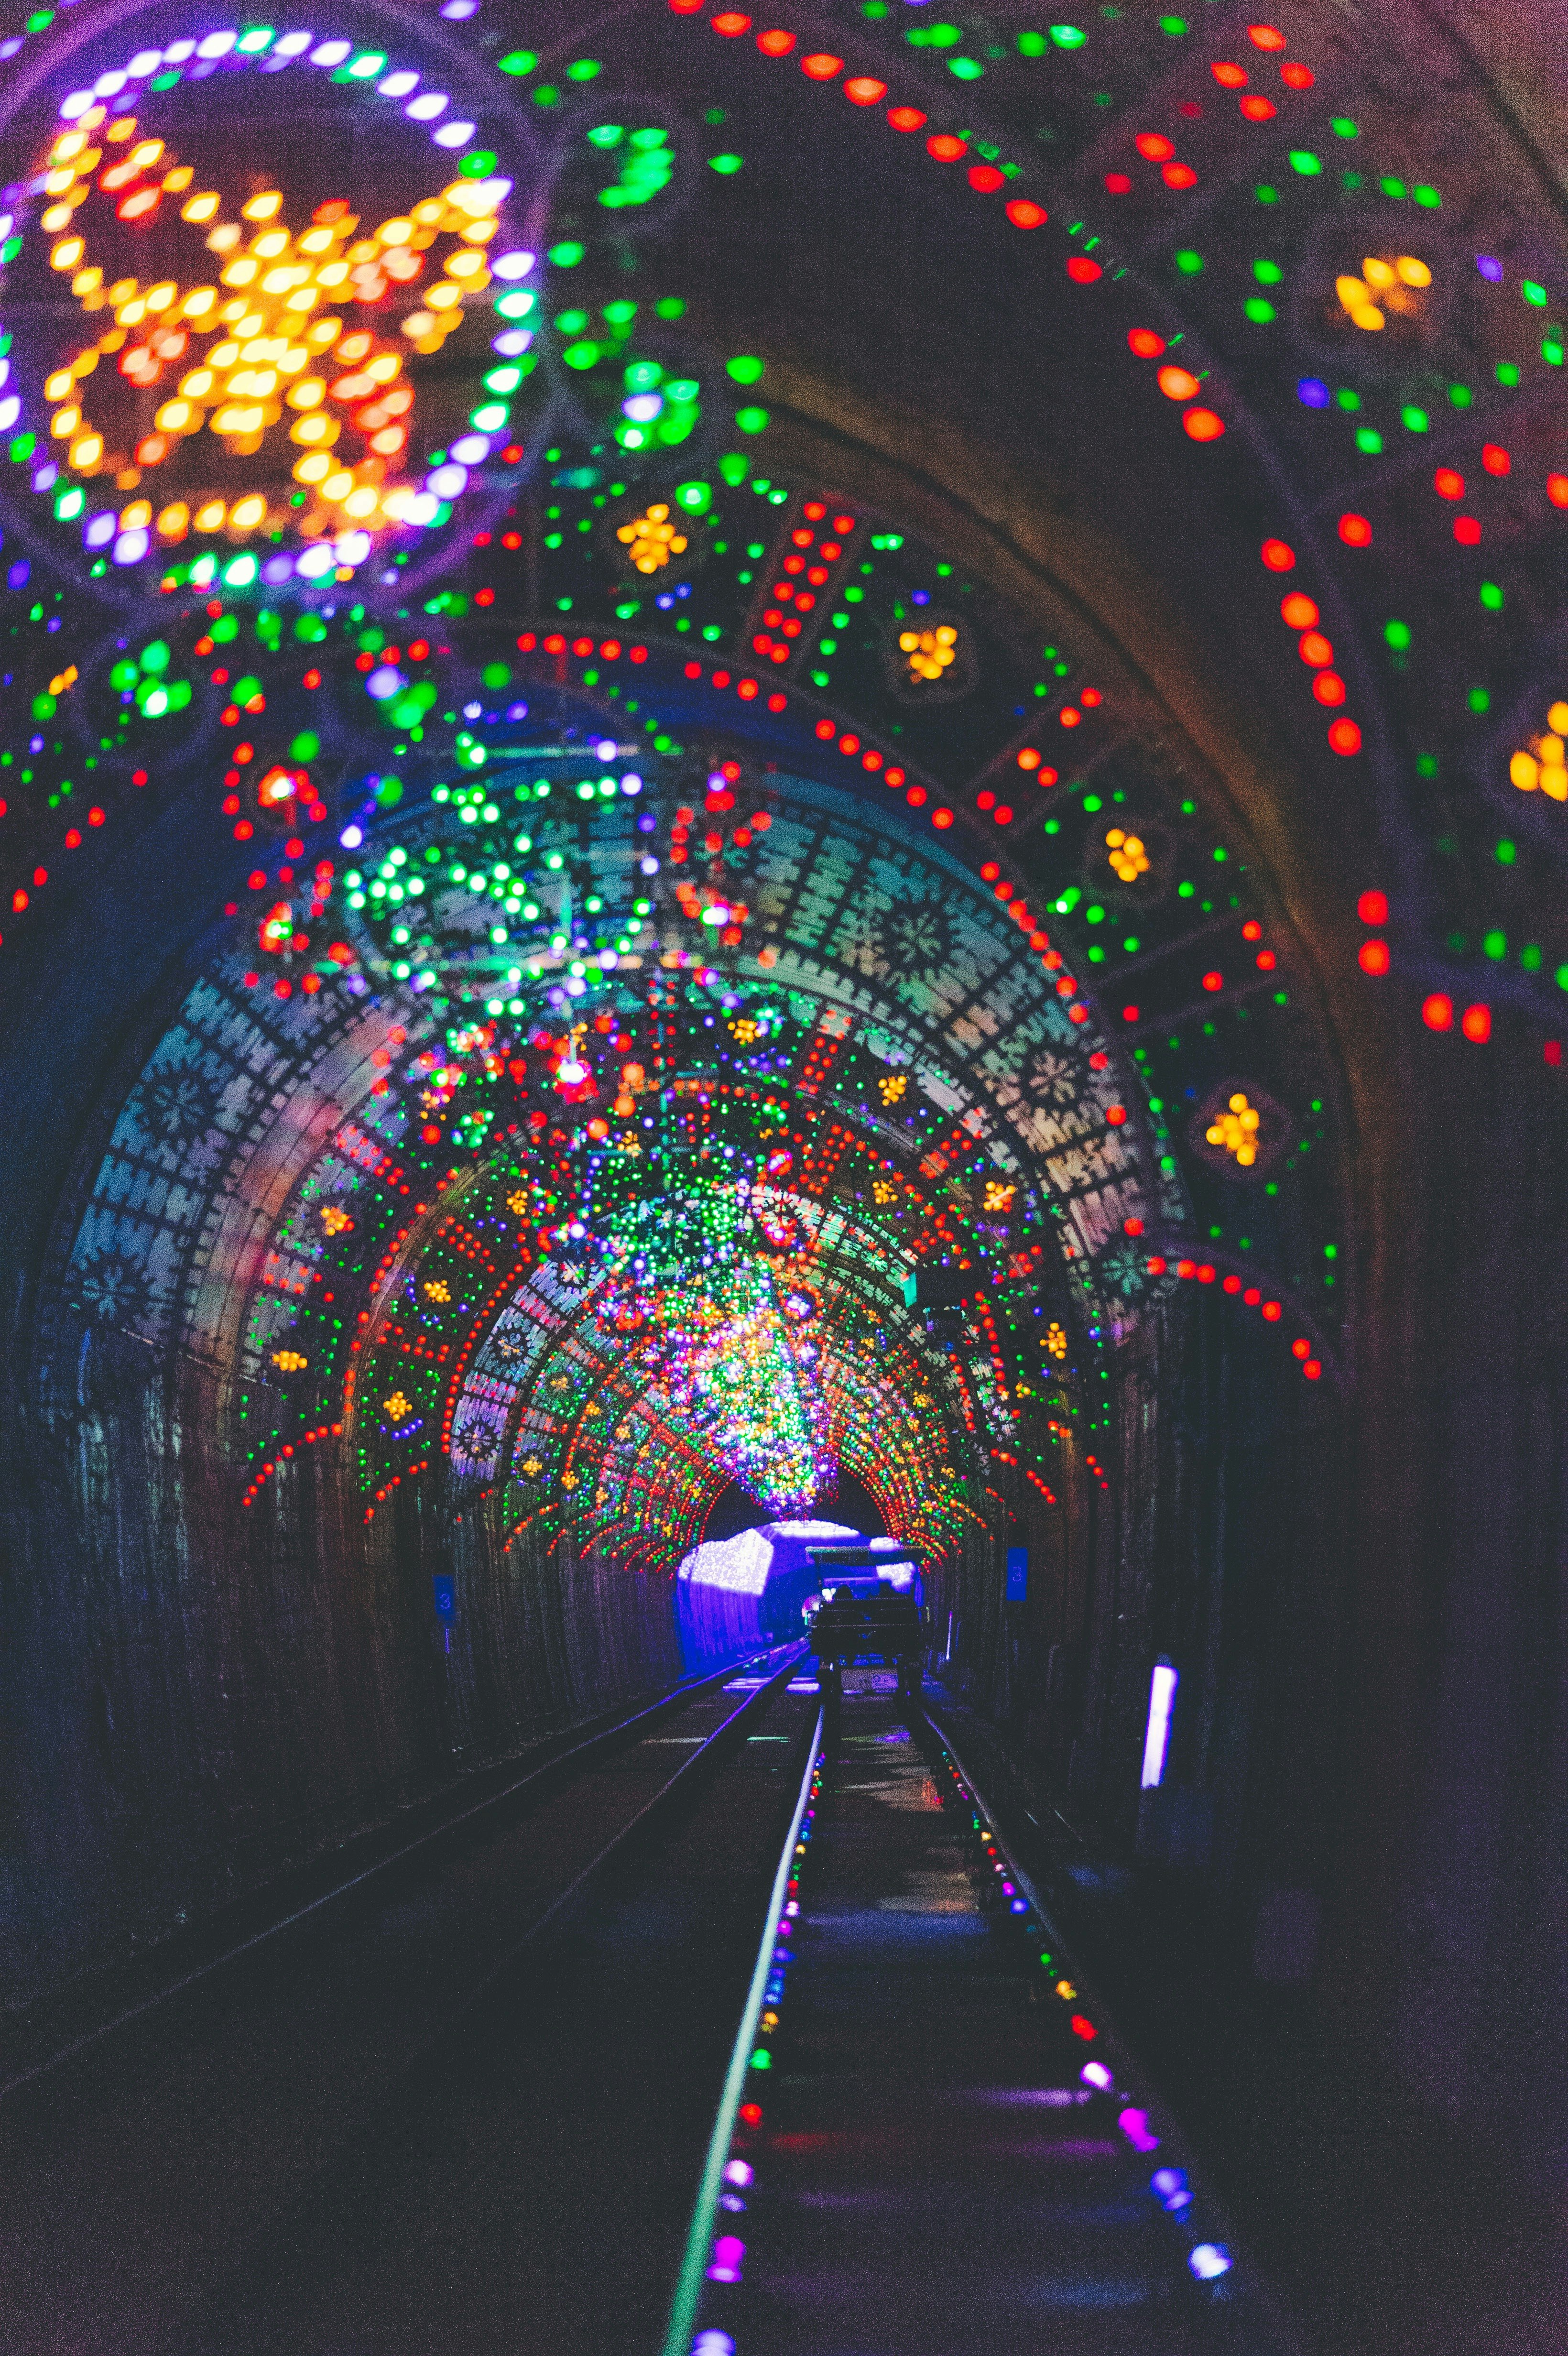 train railway surrounded by string lights